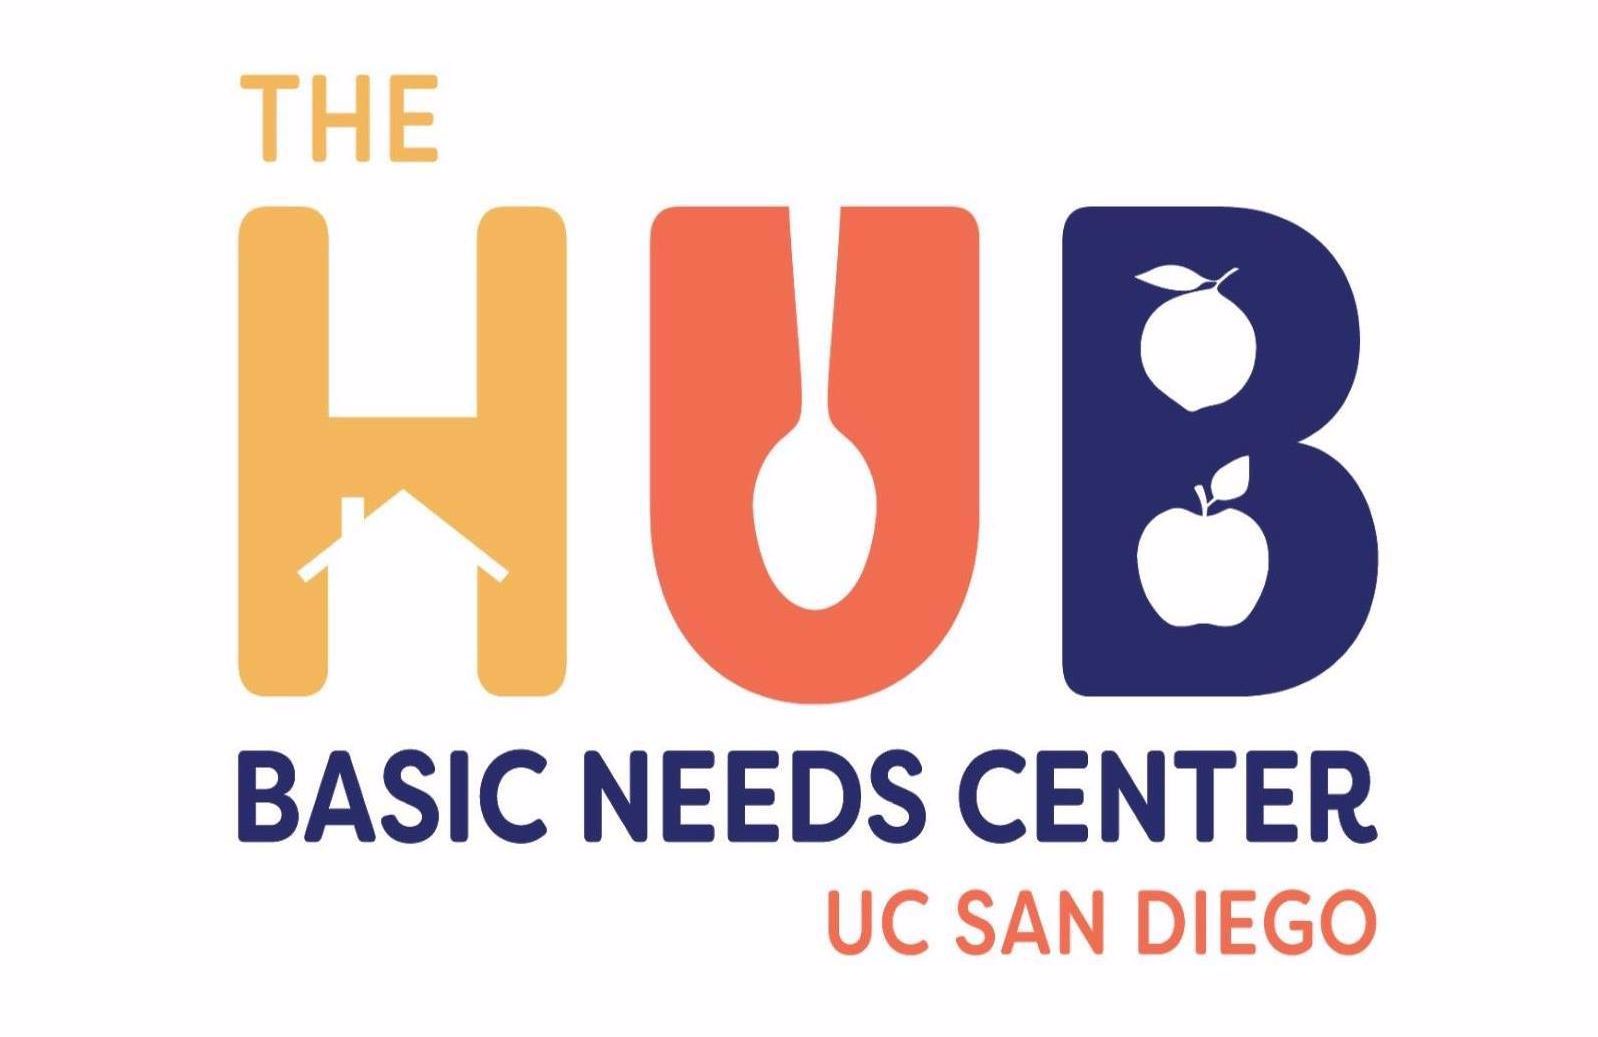 Link to The Basic Needs Center webpage